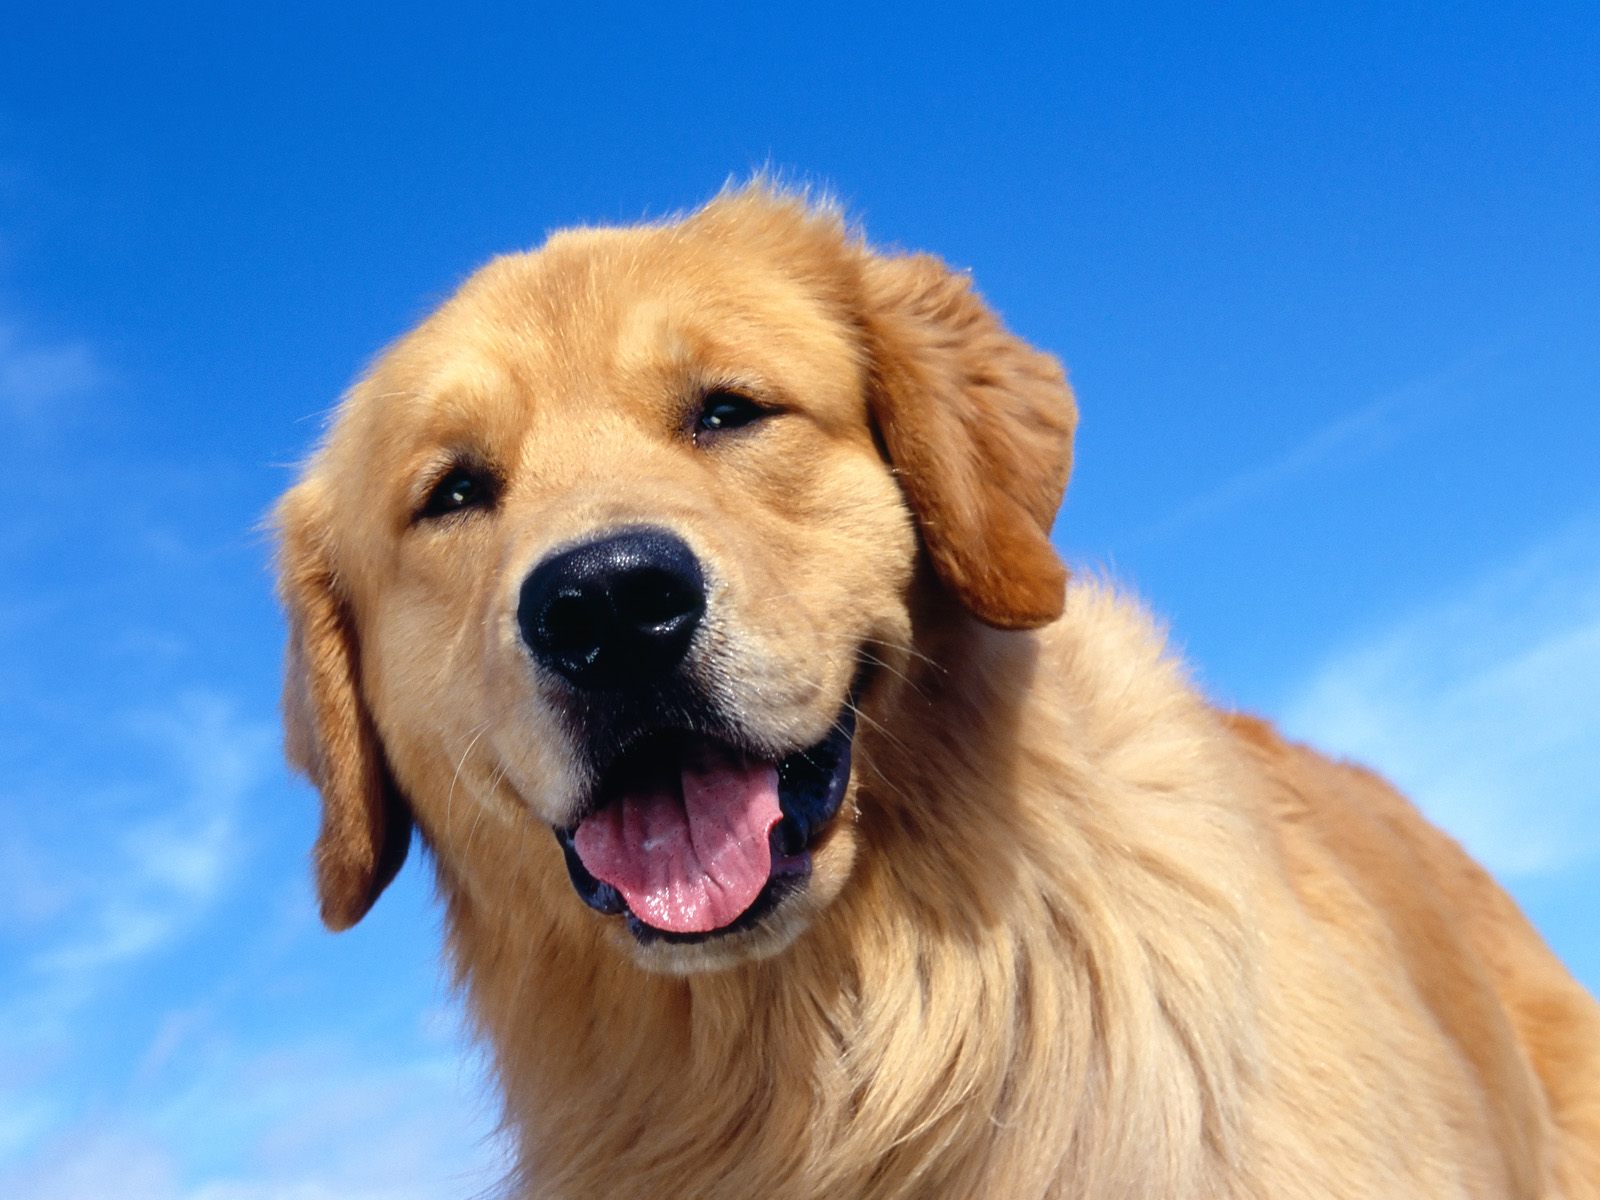 A selection of 8 Images of Golden Retriever in HD quality